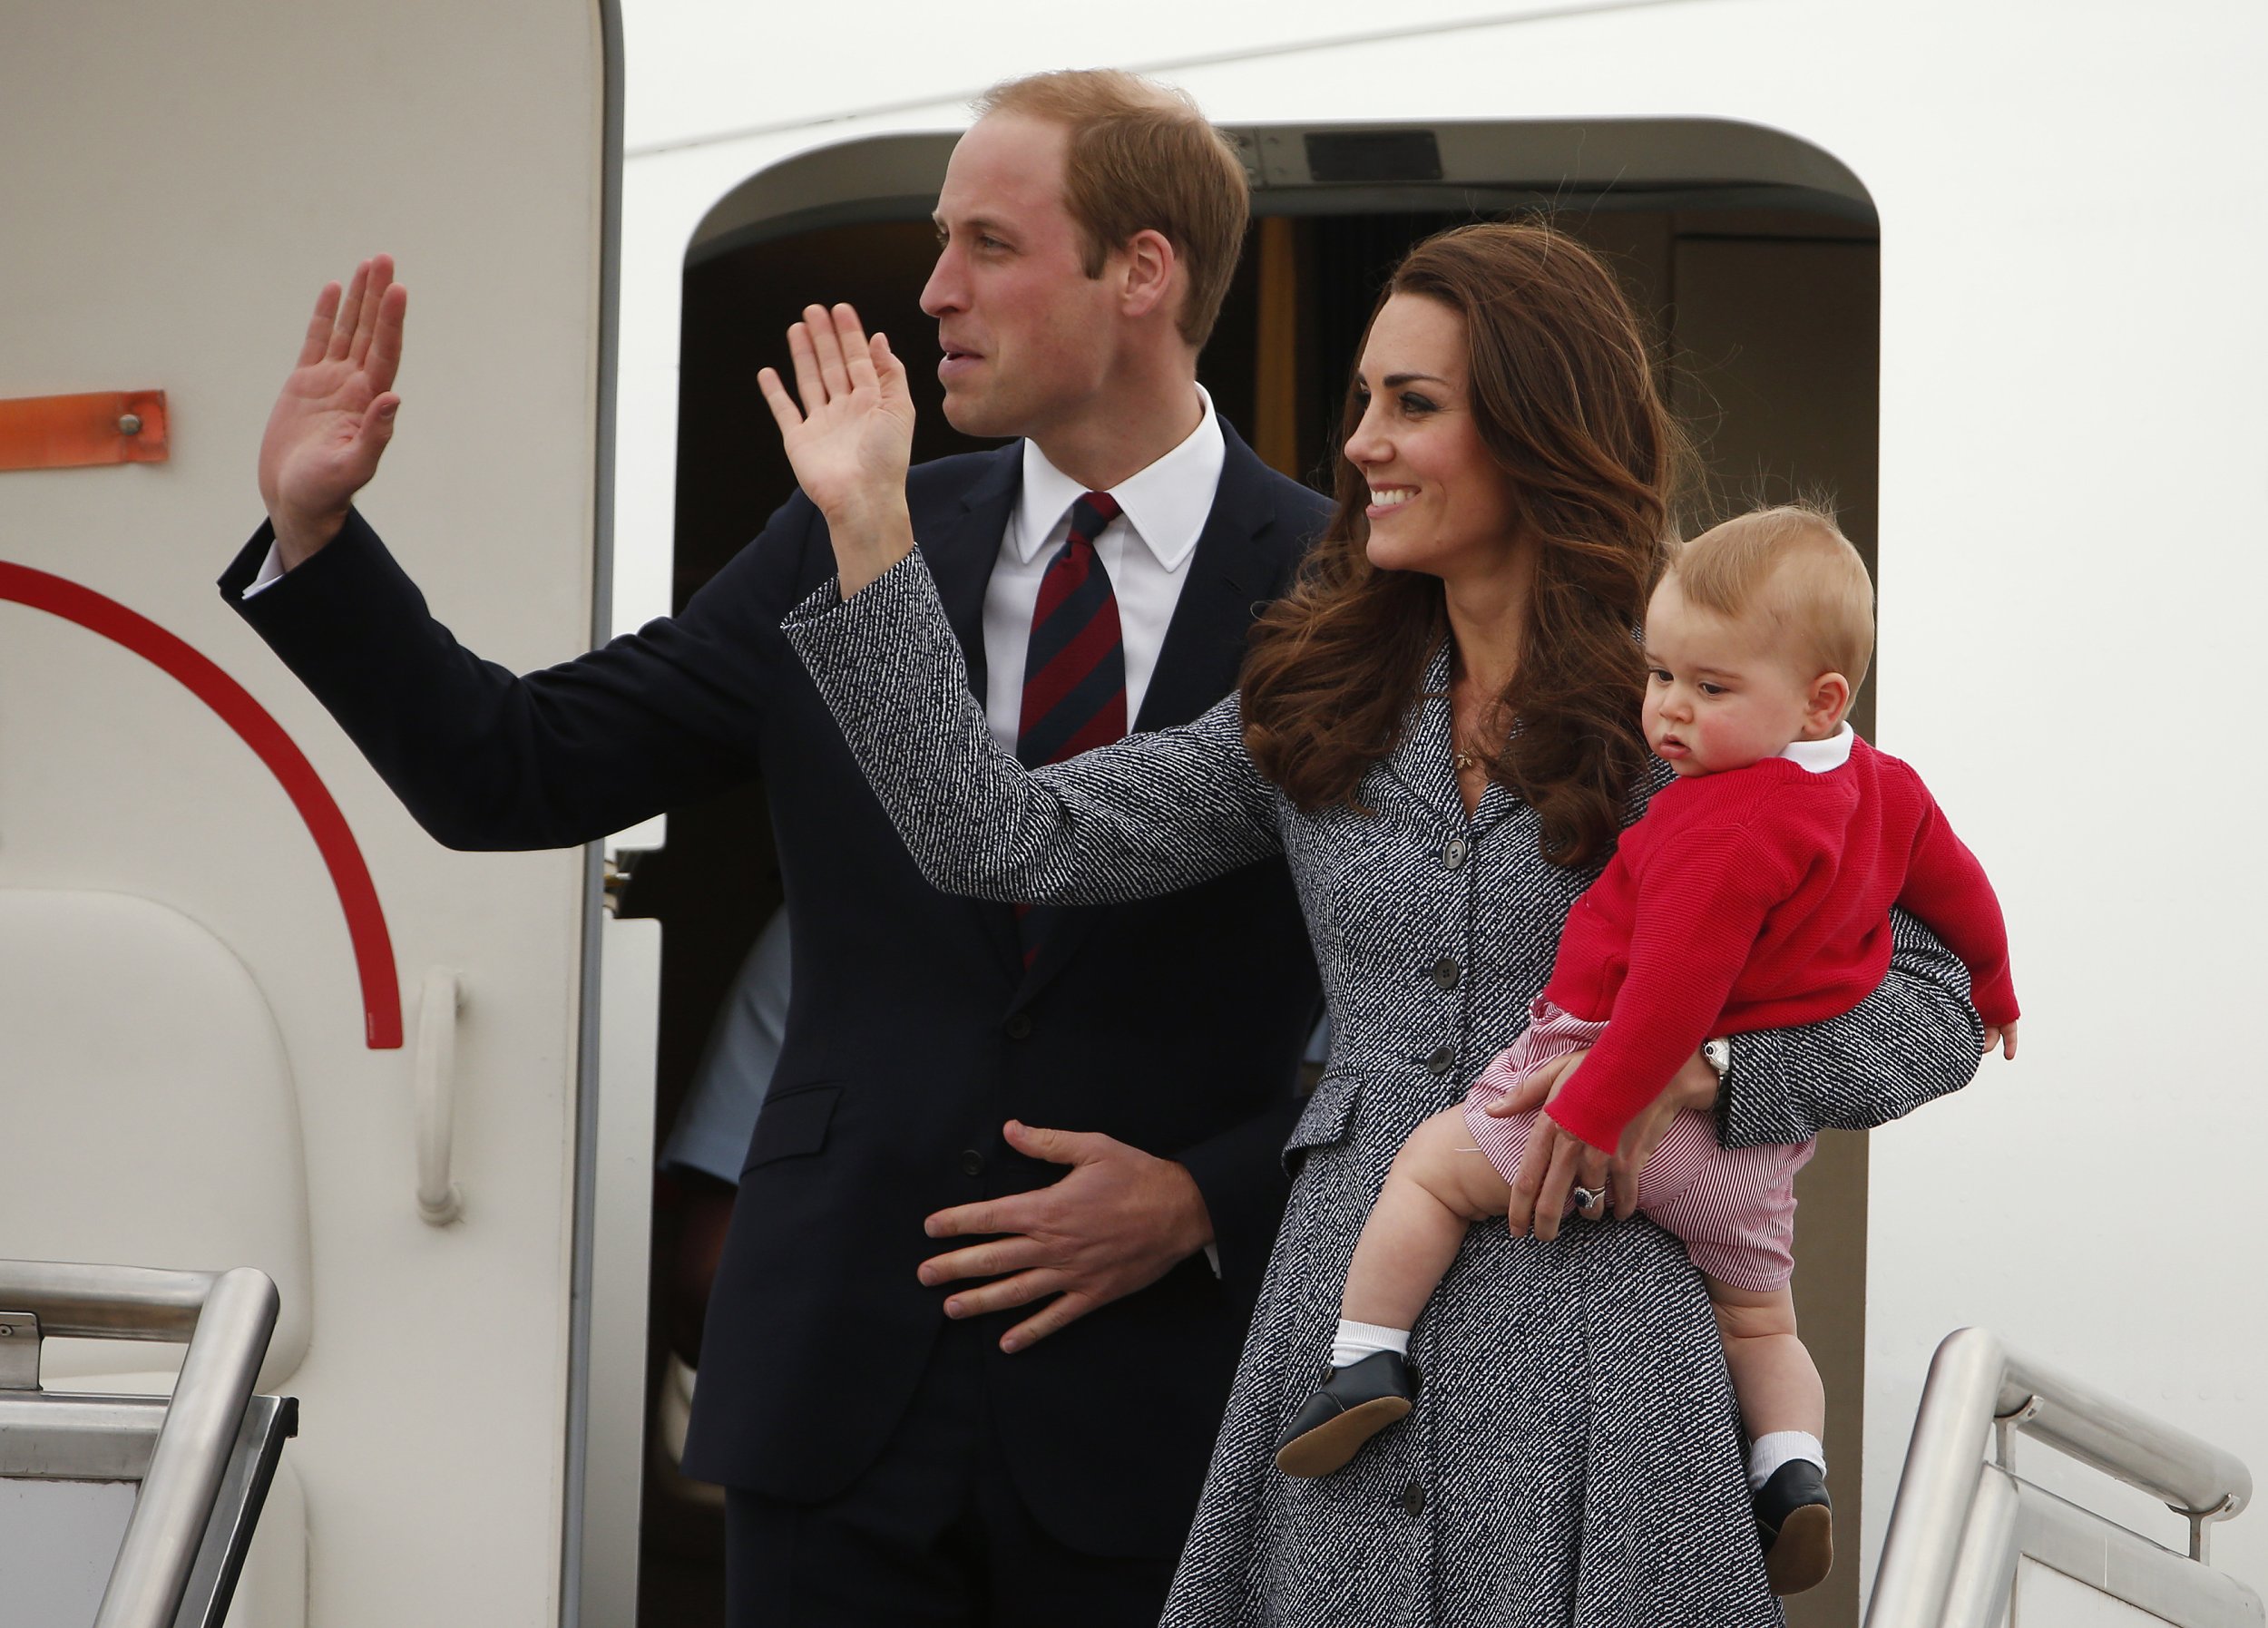 Prince George, William and Kate